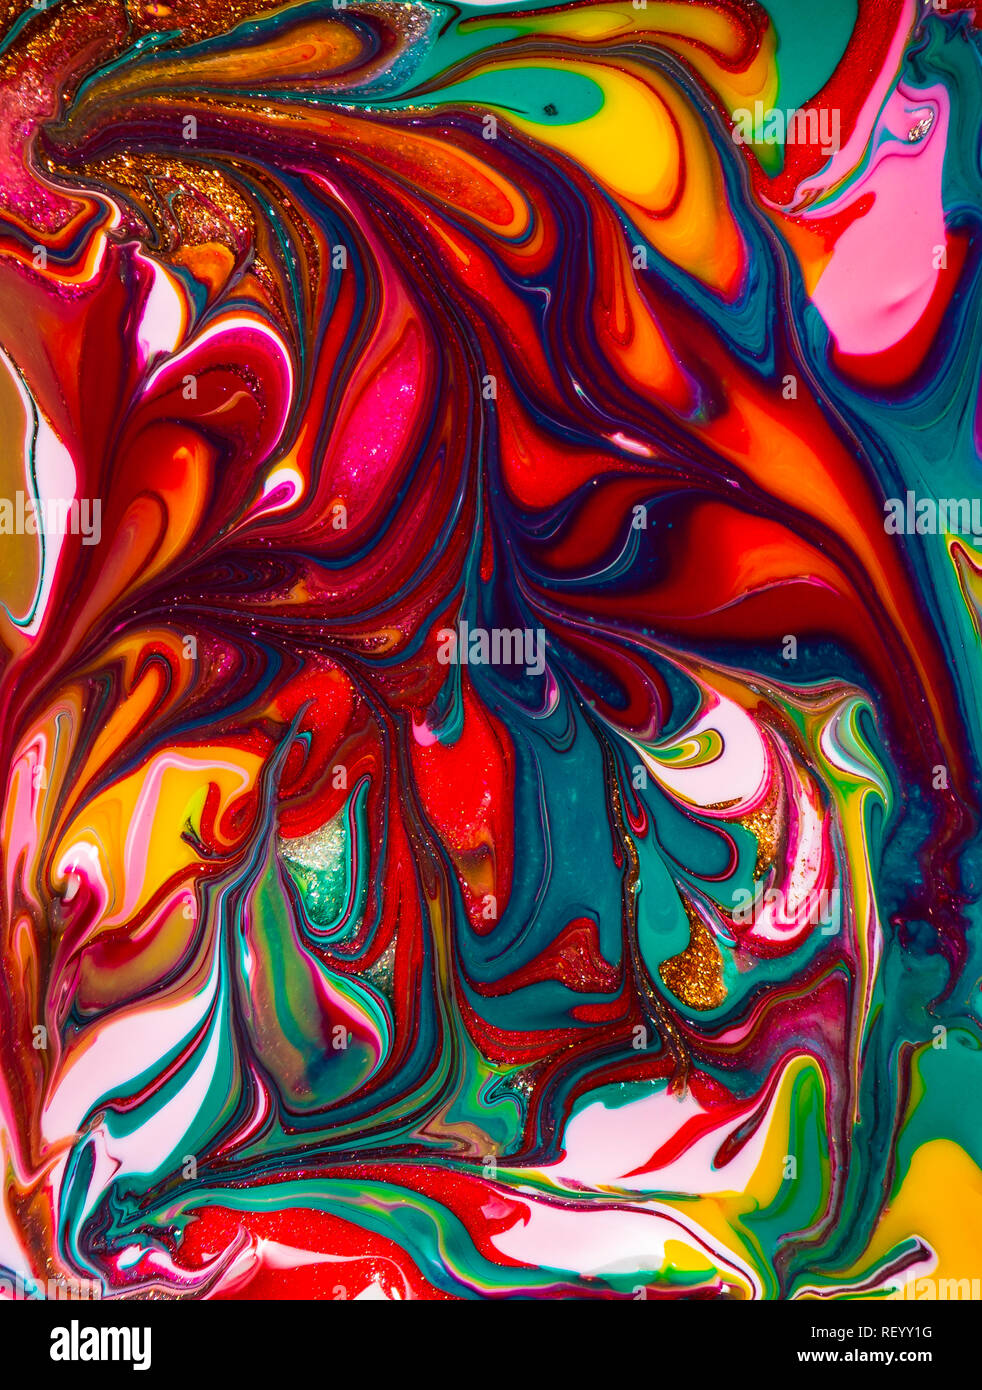 Multi colored texture. Abstract colorful background. Multicolored pattern in liquid. Creative background with abstract painted waves, handmade surface Stock Photo